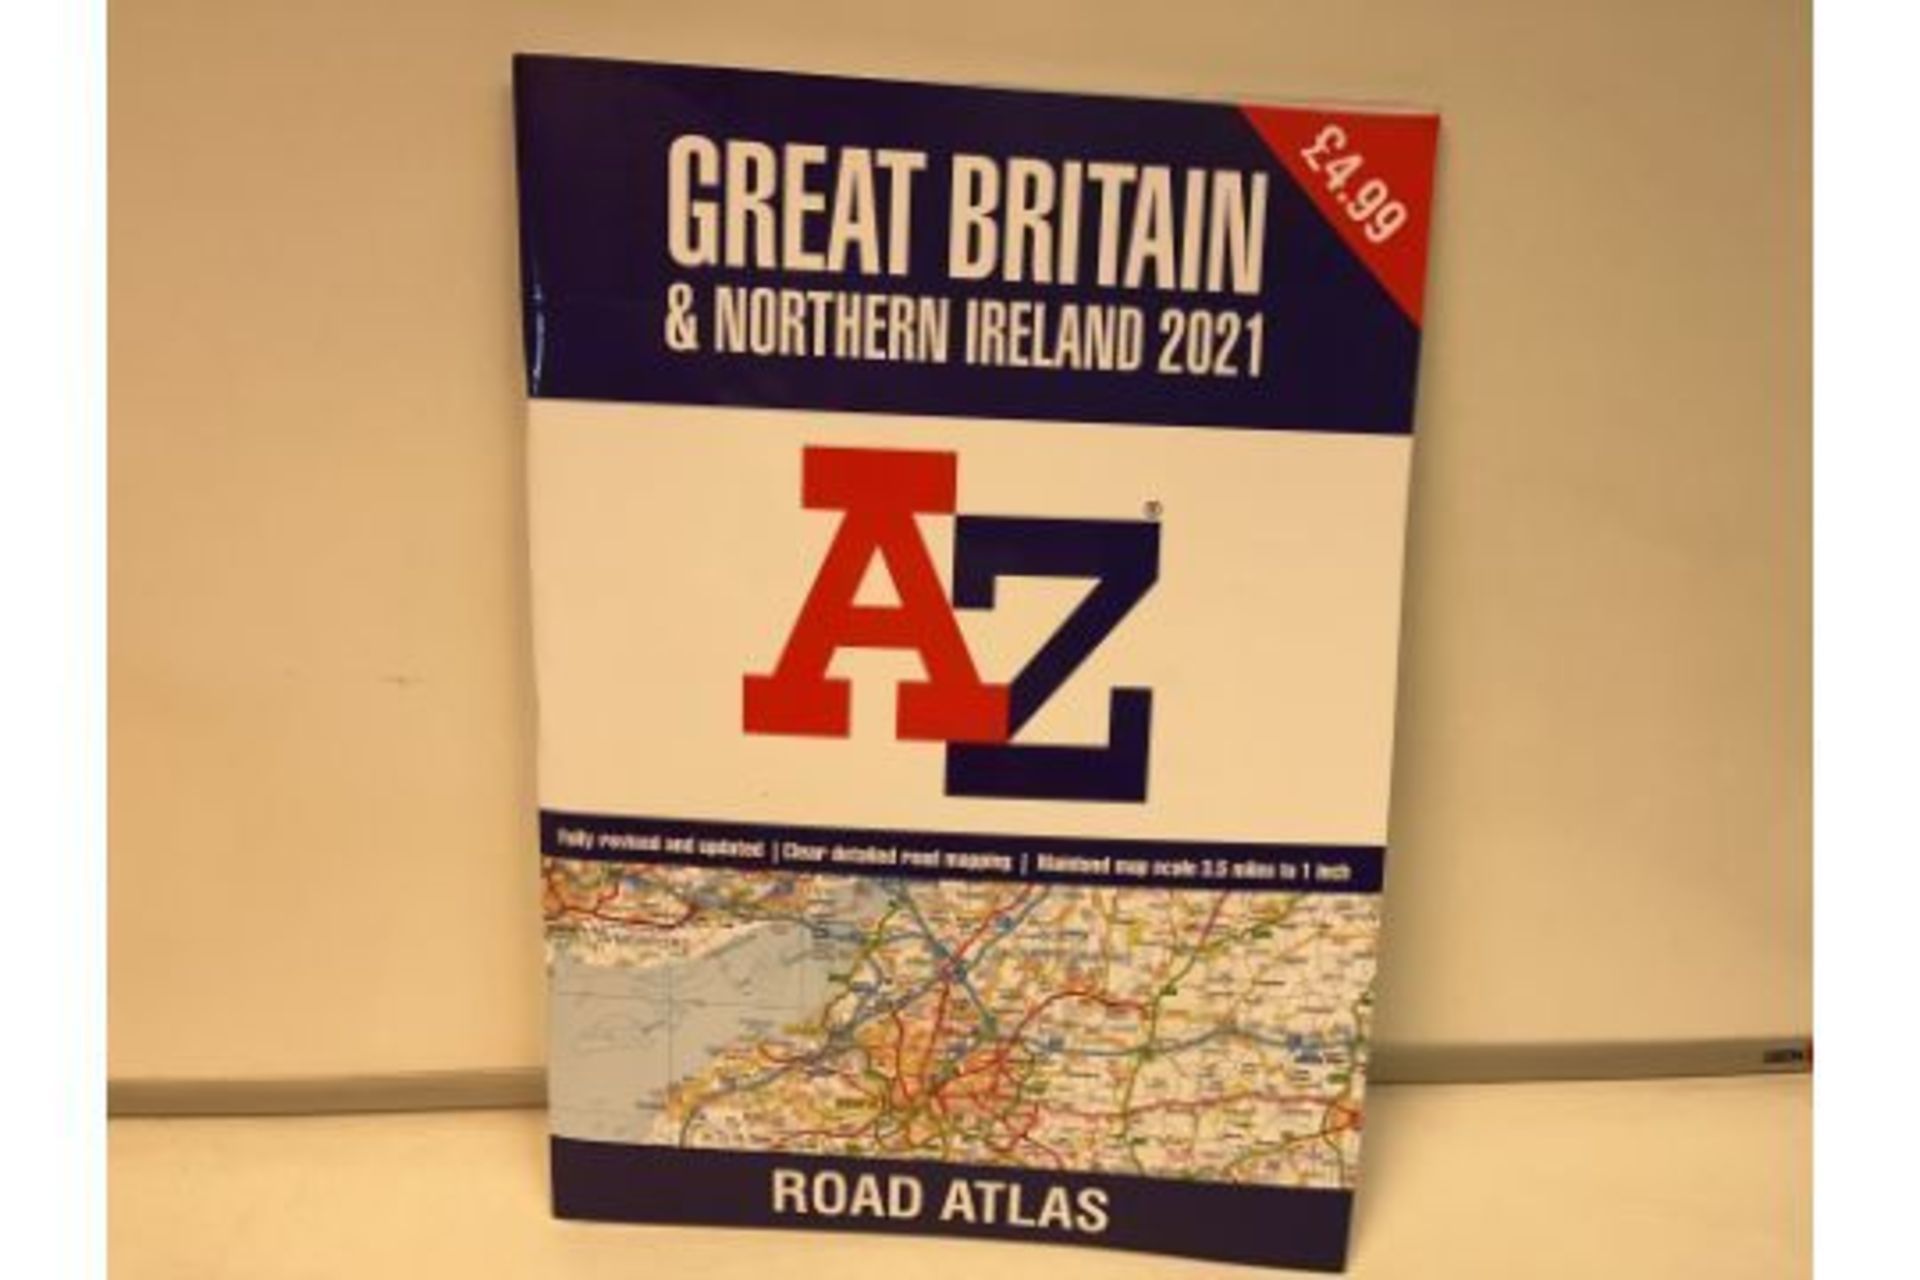 44 X BRAND NEW GREAT BRITAIN AND NORTHERN IRELAND 2021 ROAD ATLAS R5